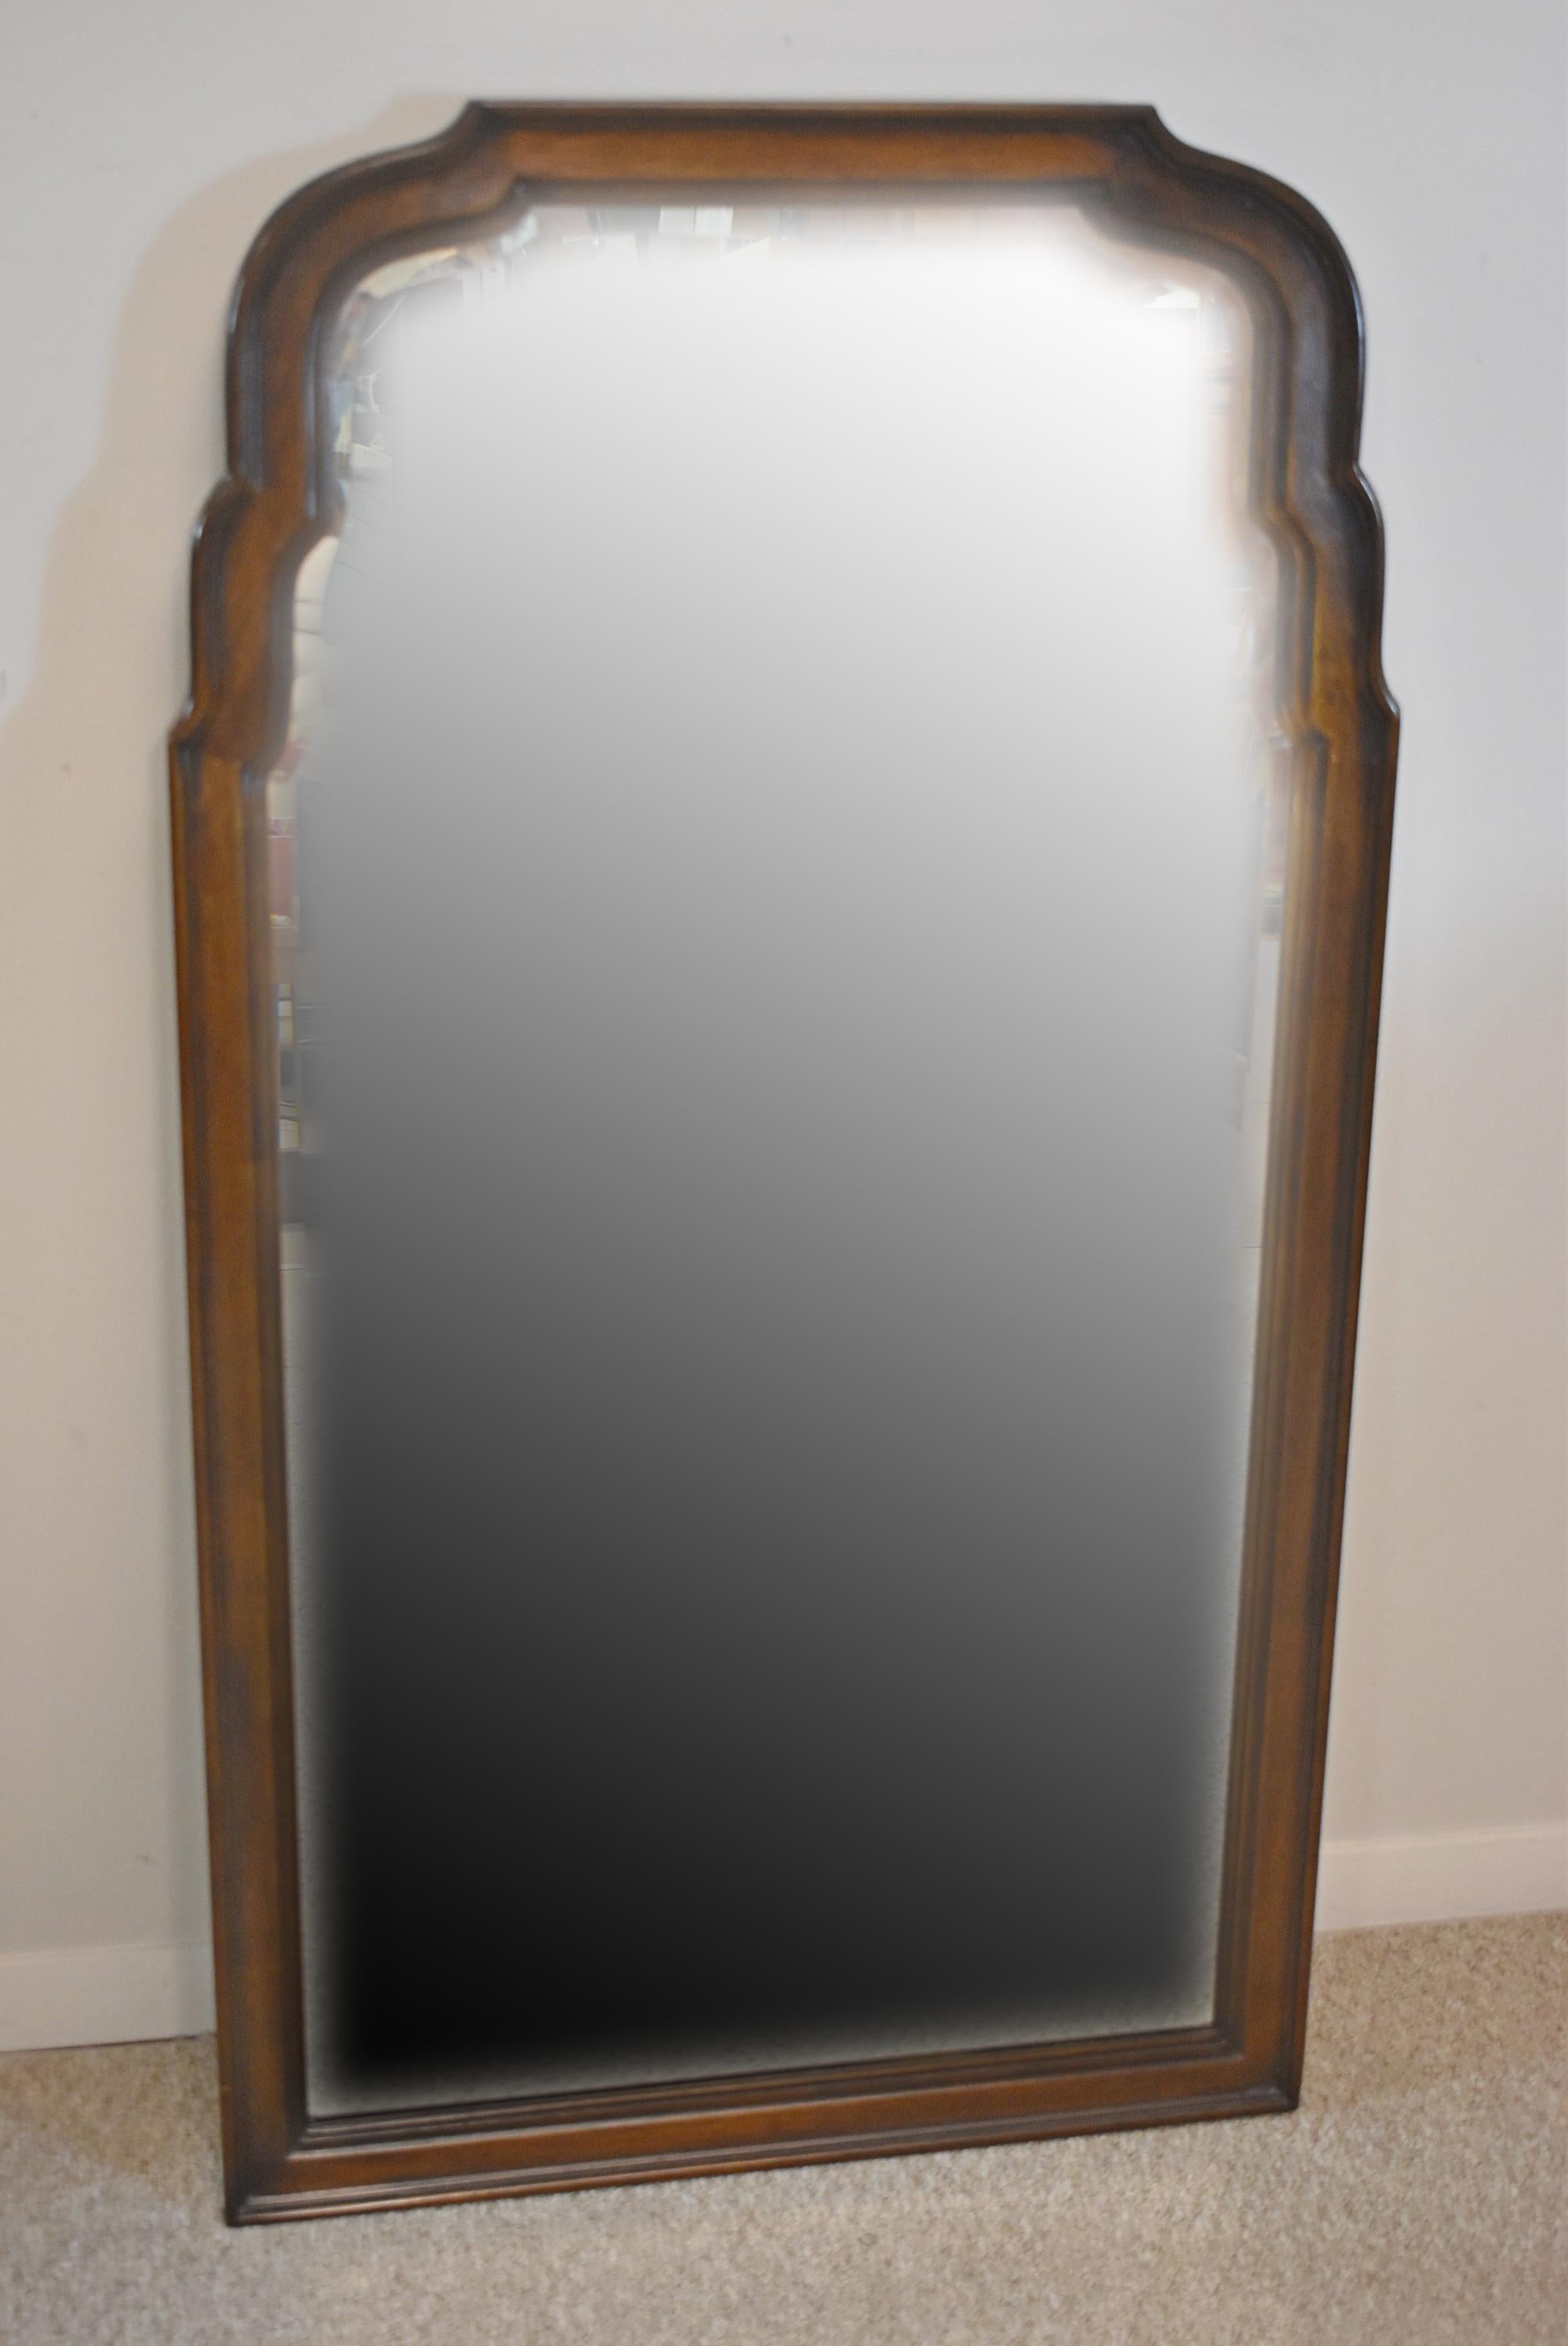 A pair of Drexel mid-century mirrors, 2 available Sold Separately. Circa 18th century as stamped on the back. Walnut frames in original finish. Good condition. Dimensions: 17.50